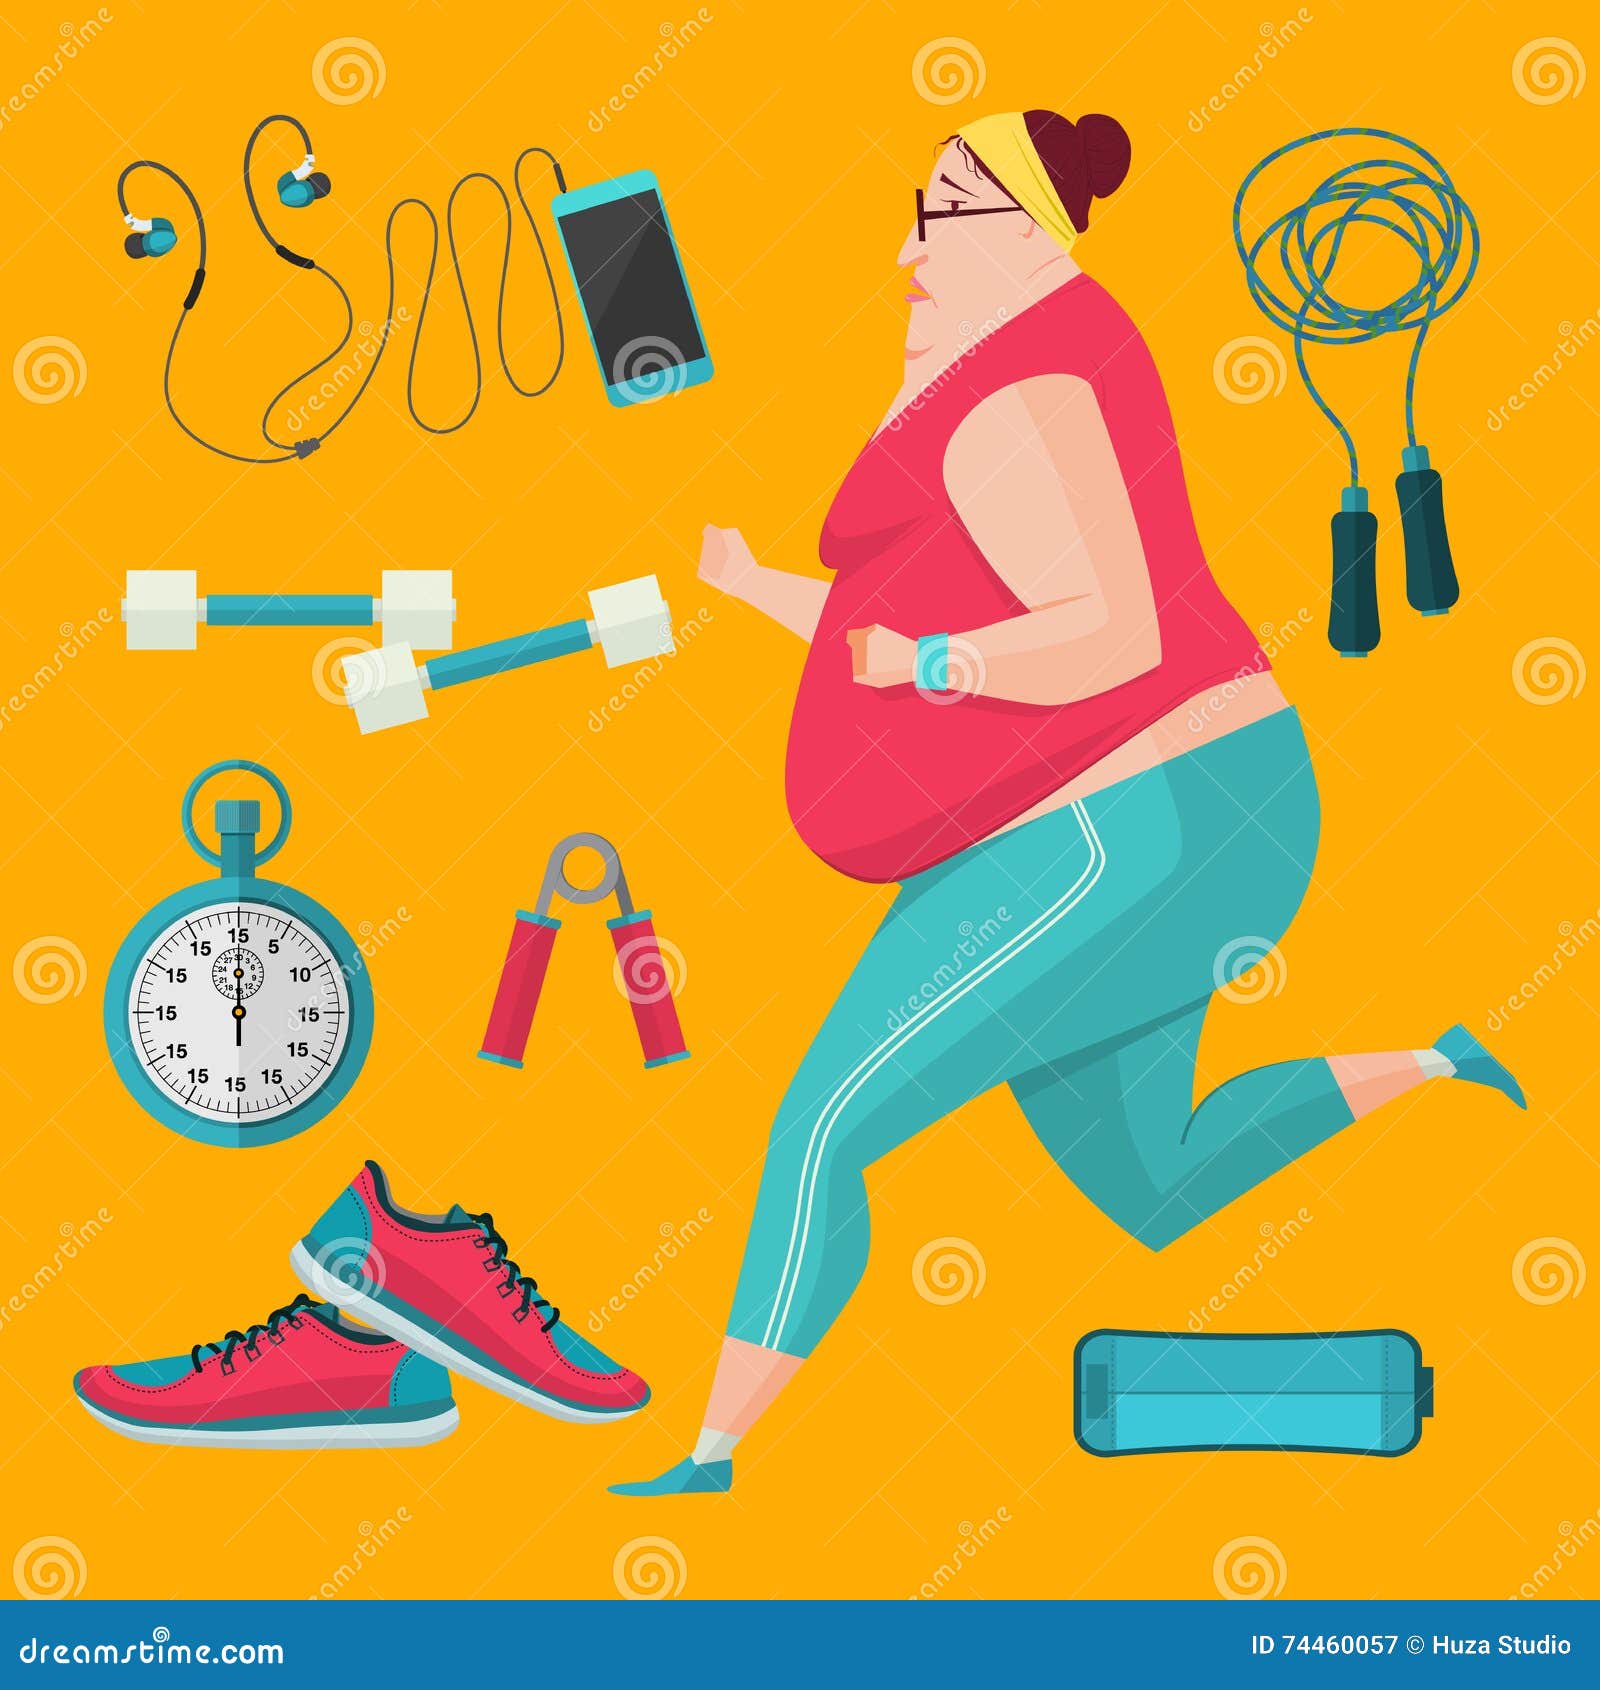 https://thumbs.dreamstime.com/z/obese-women-jogging-to-lose-weight-vector-illustration-flat-style-fitness-equipment-74460057.jpg